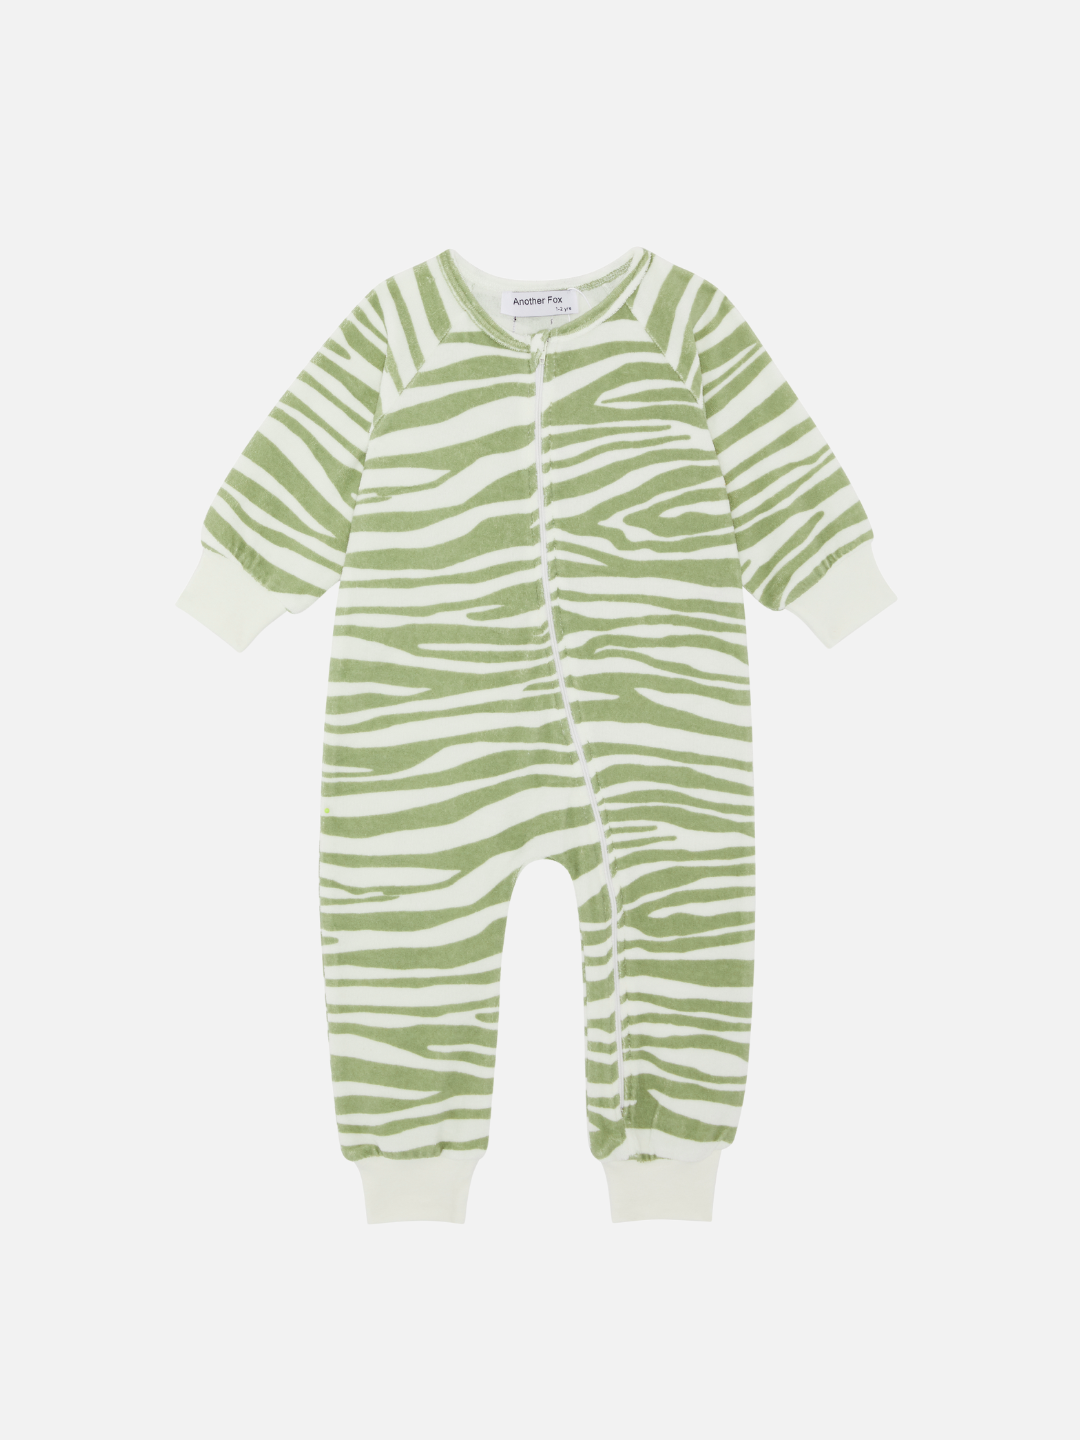 Tiger | A front view of the baby terry towel sleep suit in green tiger print